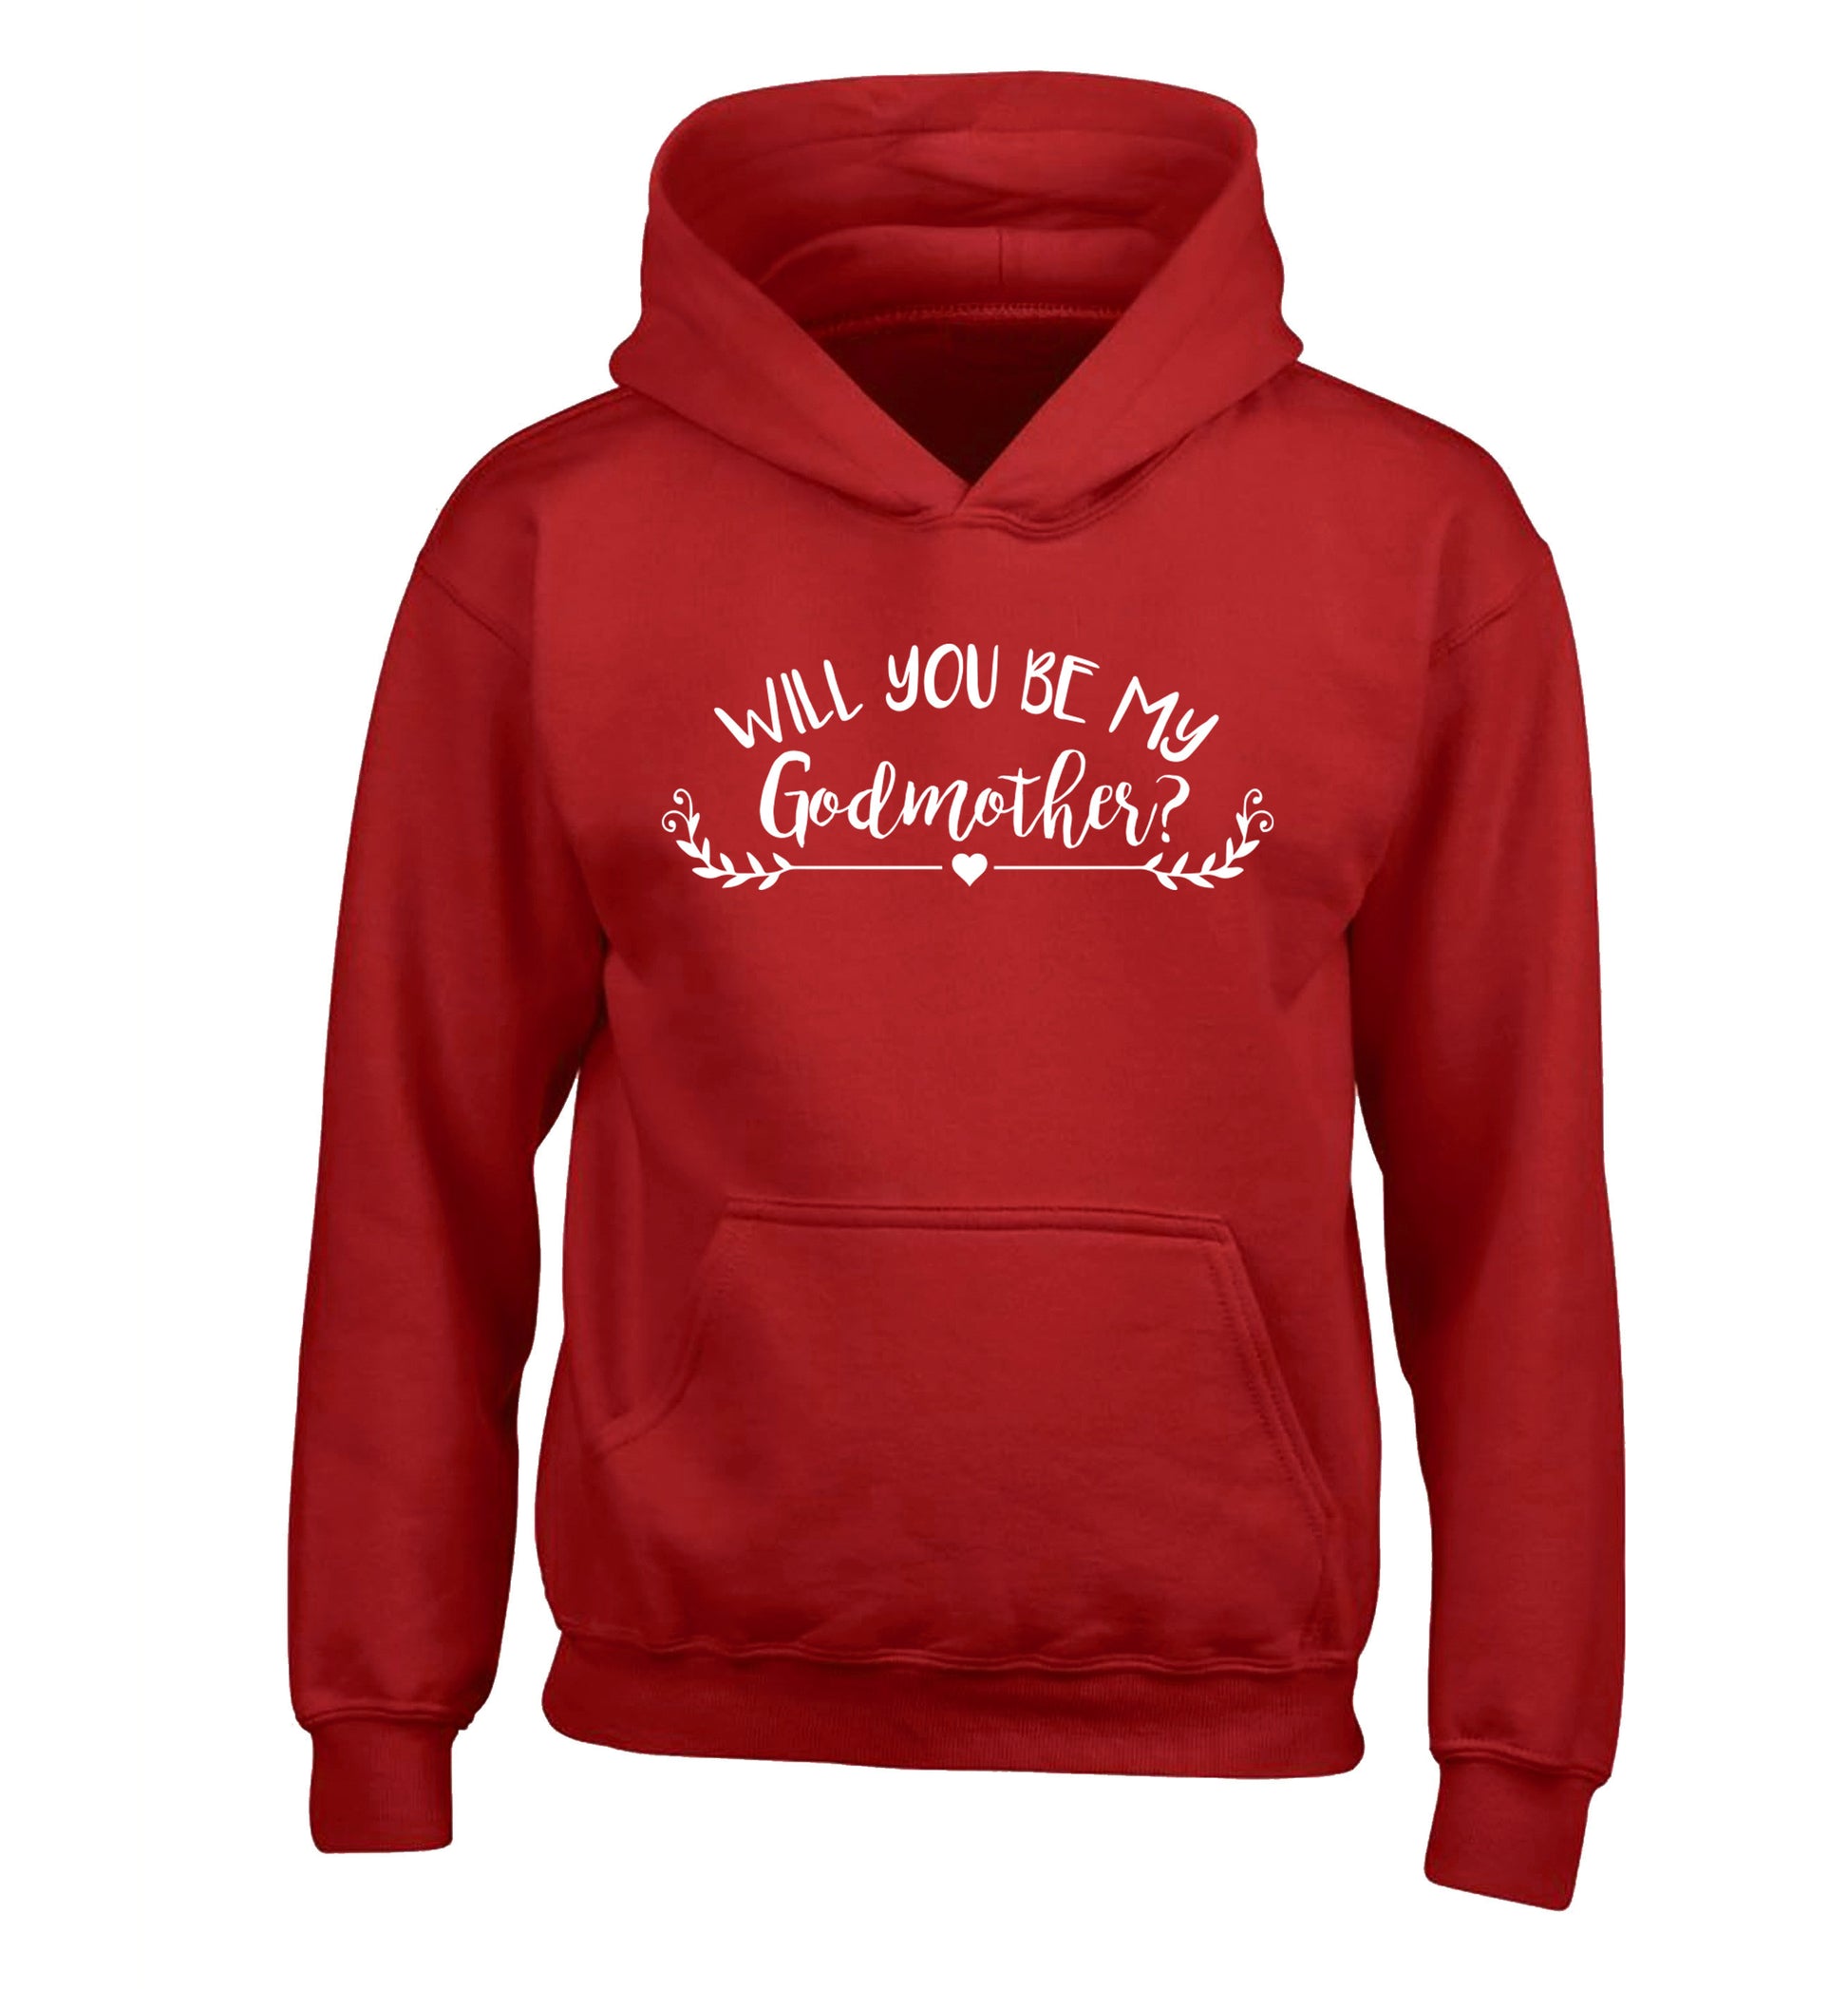 Will you be my godmother? children's red hoodie 12-14 Years